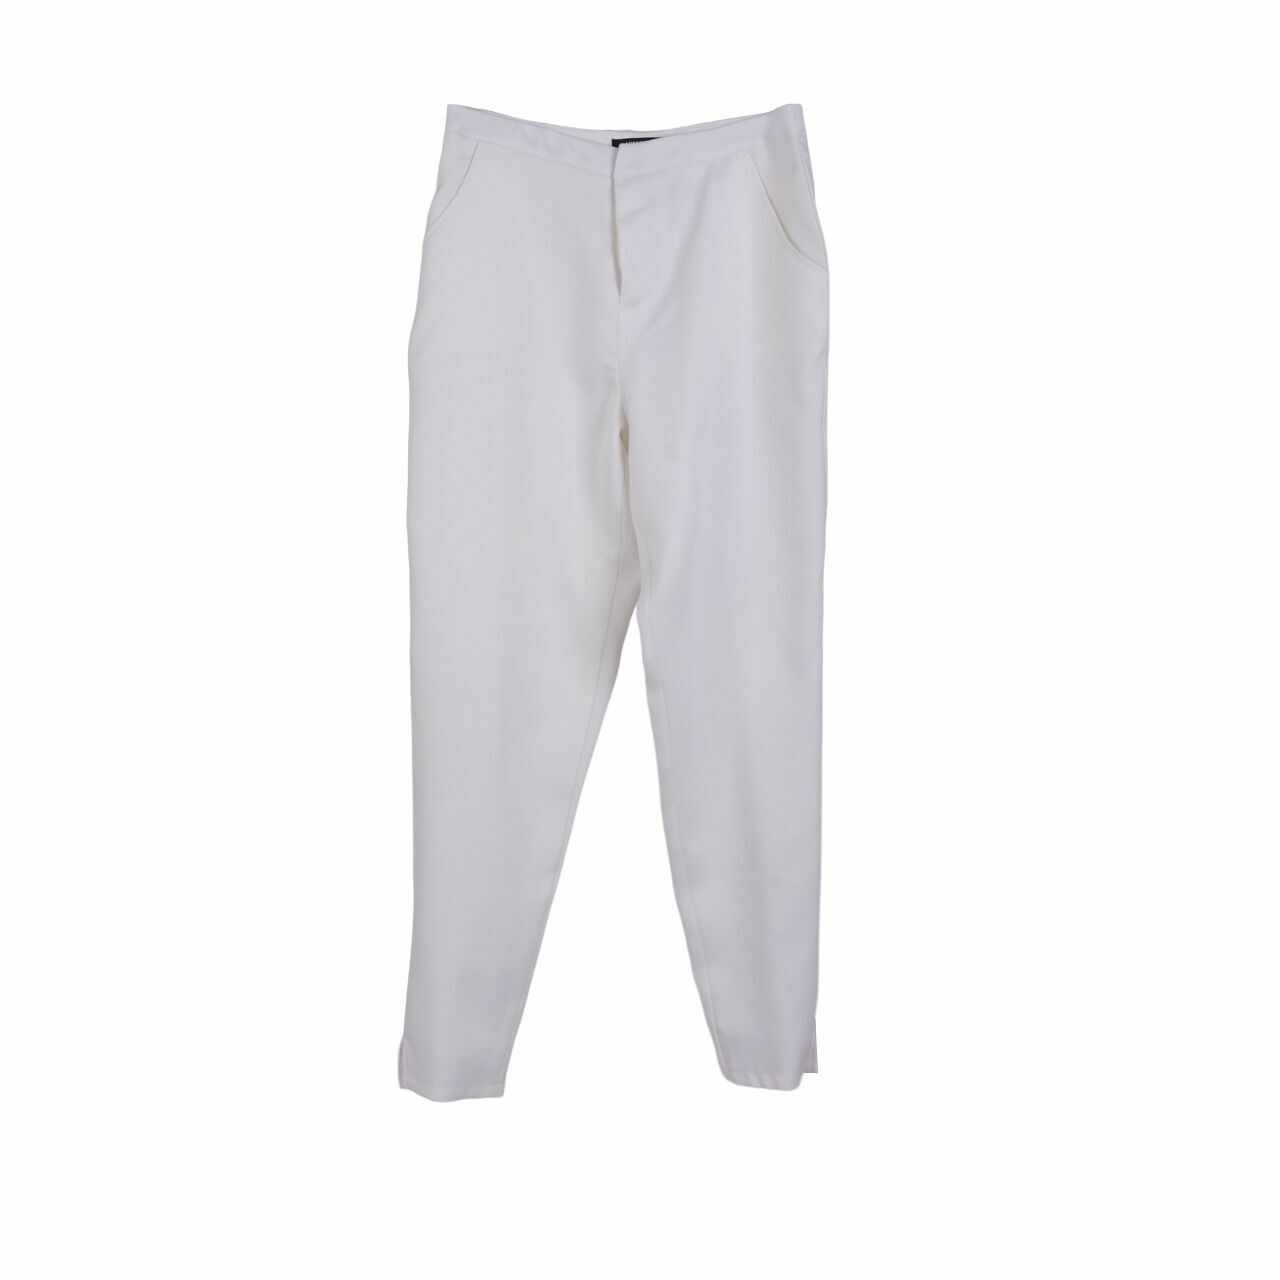 Missguided White Long Pants